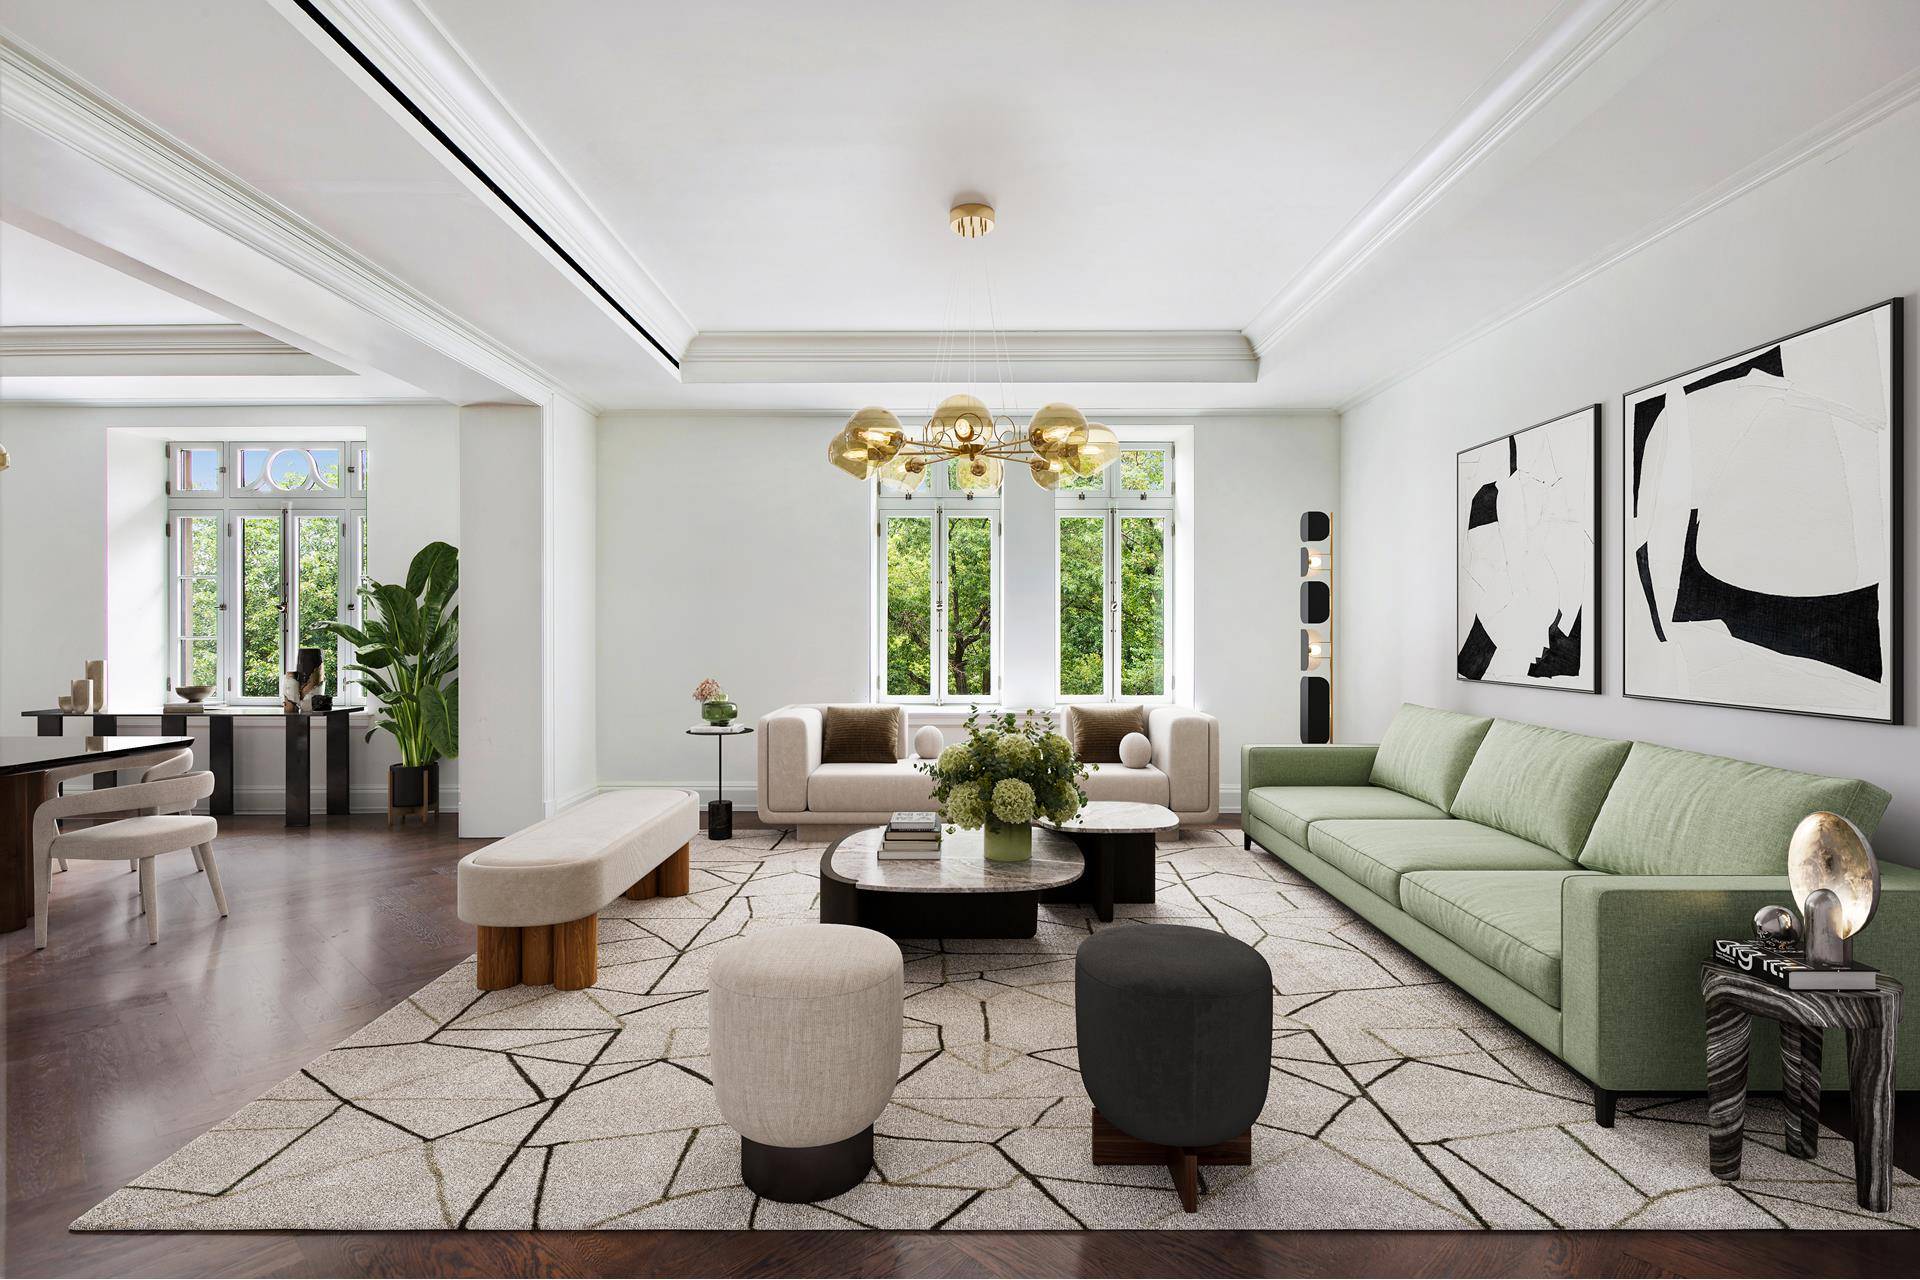 This one of a kind five bedroom, five and a half bathroom home offers park views in the Upper West Side's most coveted Pre war building the newly upgraded, restored ...